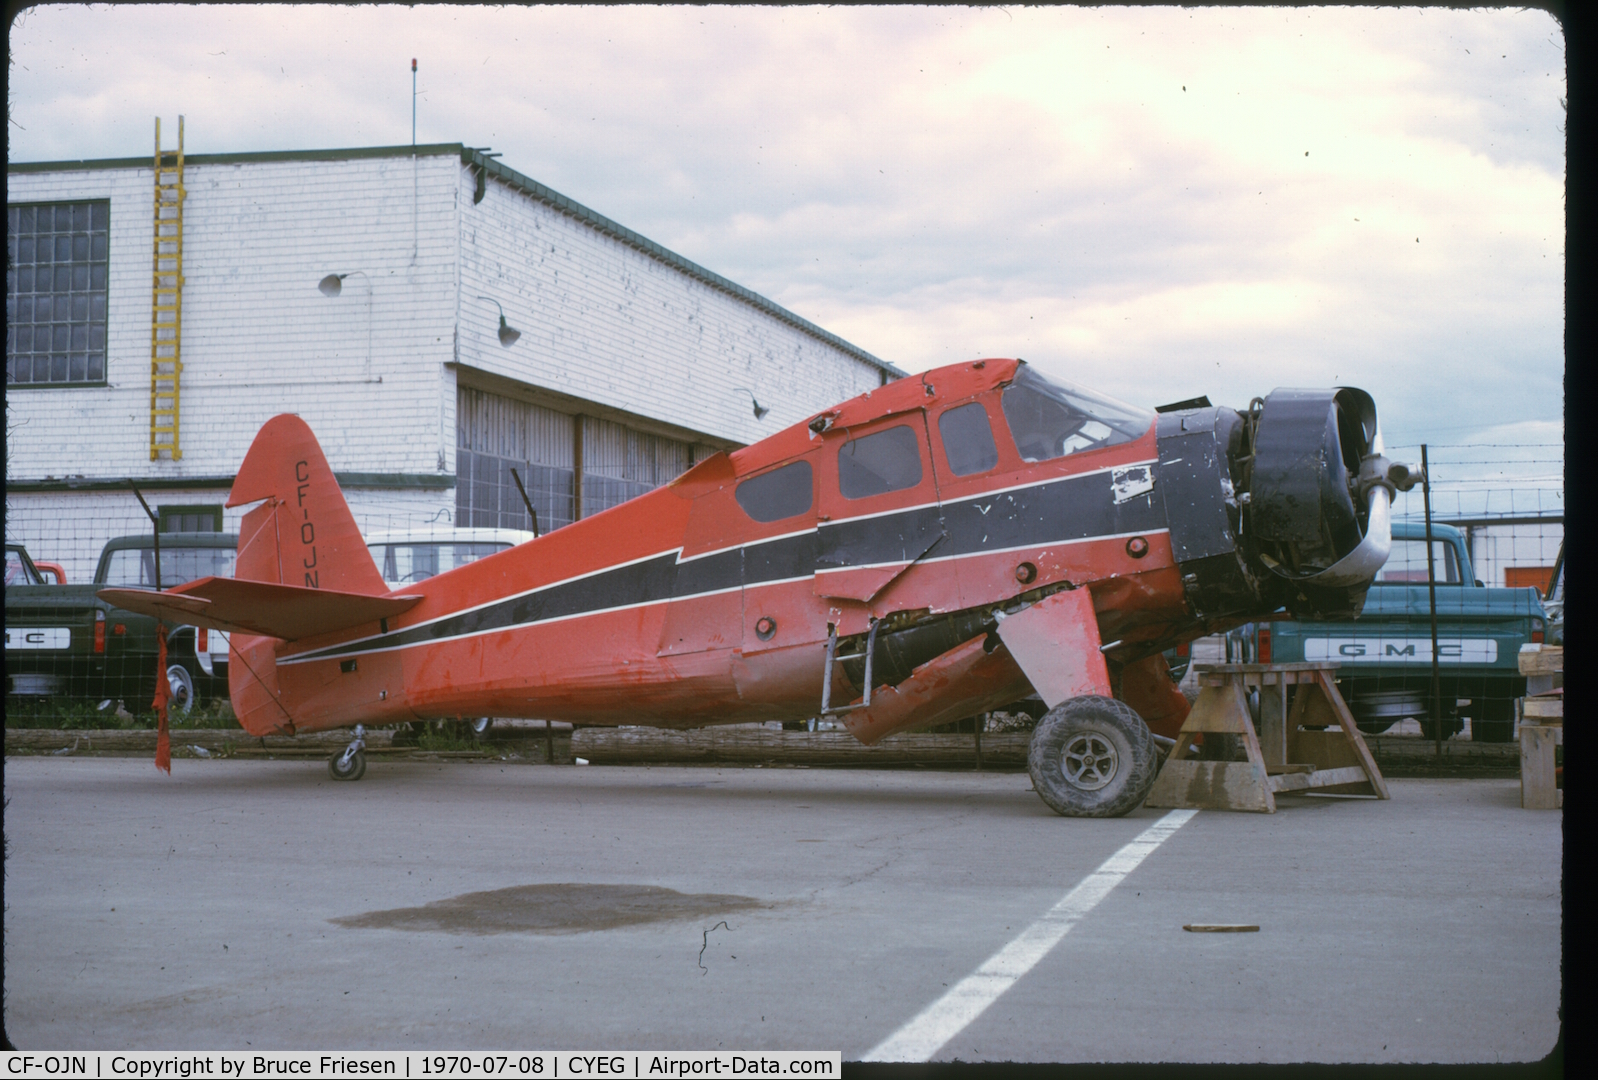 CF-OJN, 1944 Howard Aircraft DGA-15P C/N 1004, Going through old slides, as one does, I bumped into this one.  Used your site to identify the aircraft.  Thought I might as well reciprocate with the photo.
I see you list the owner as Stan Reynolds of Wetaskiwin, Alberta.  An amazing story - I could ex